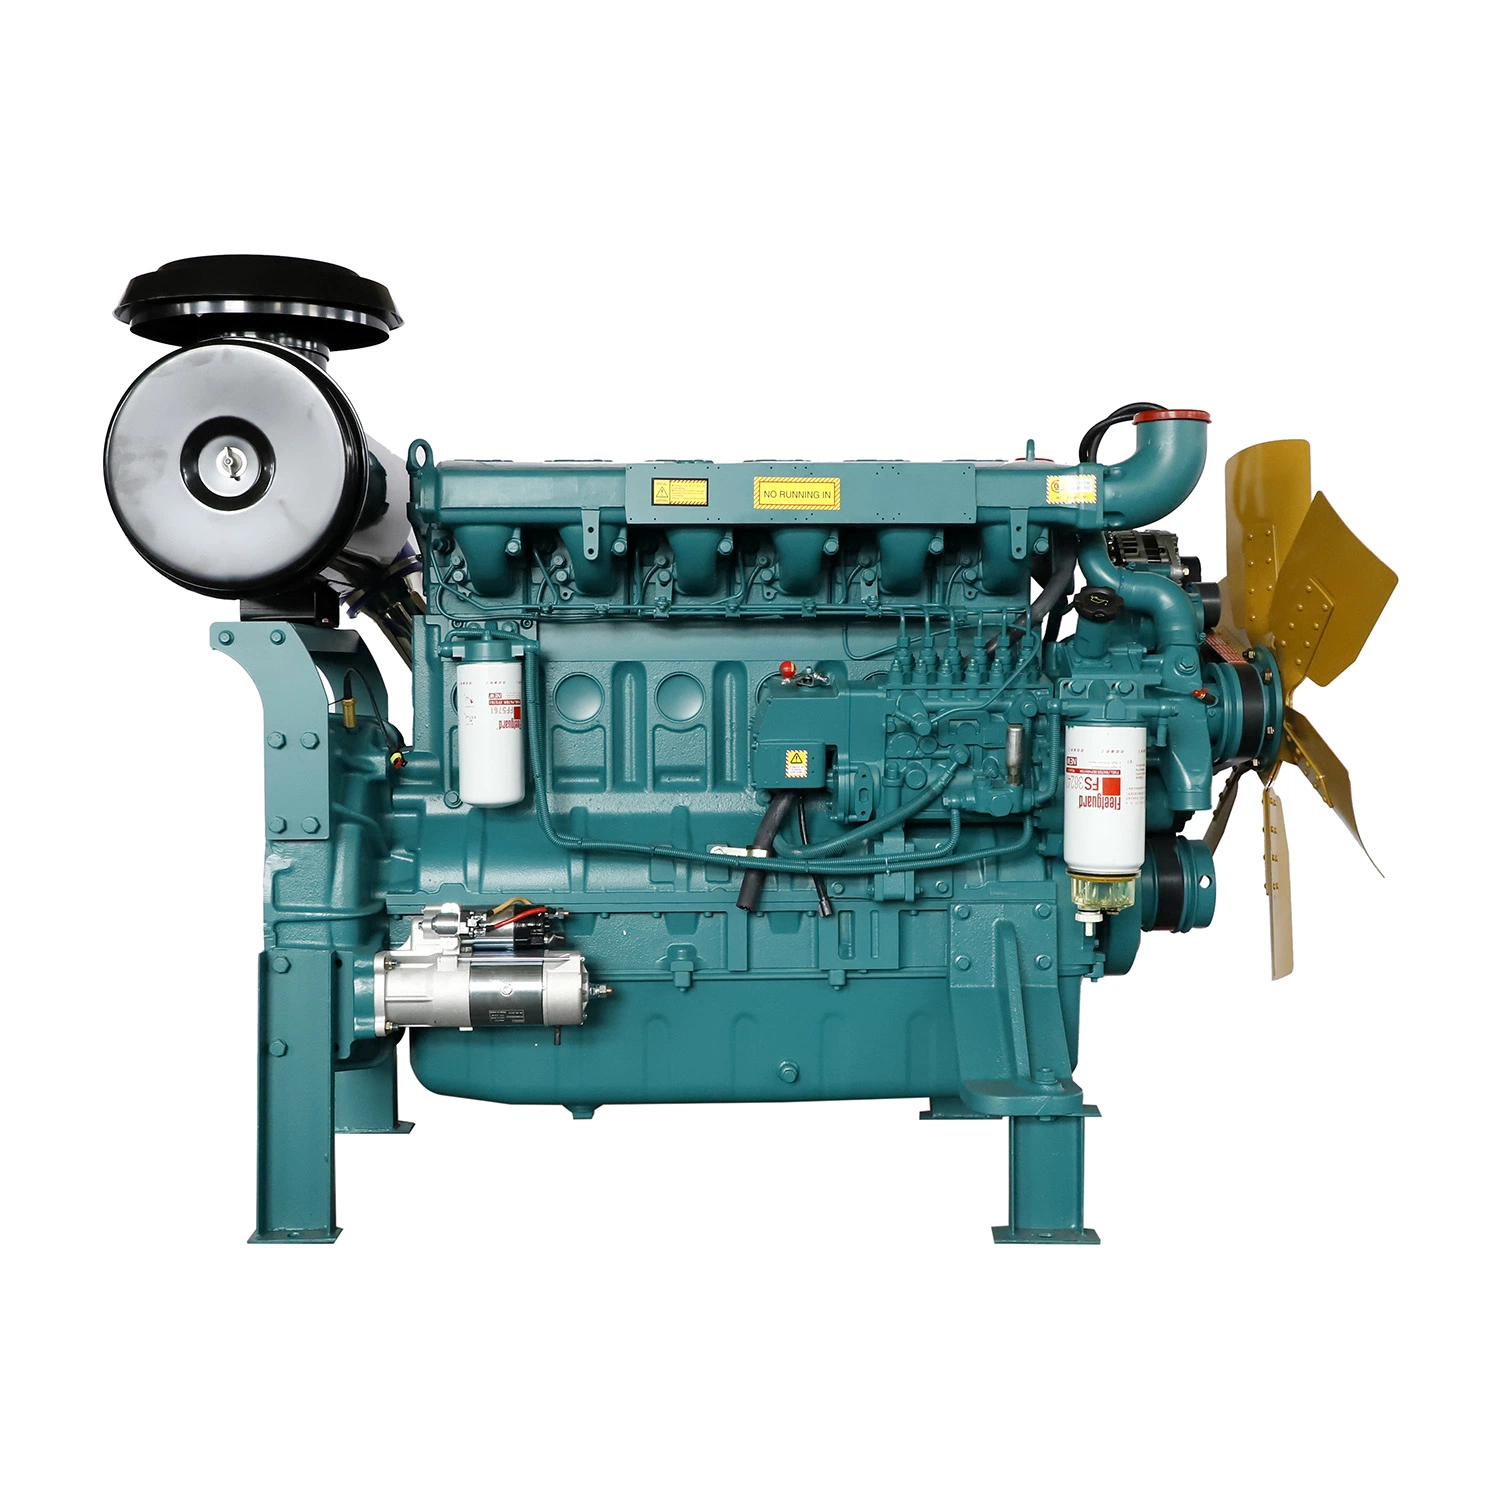 Brand New 6 Cylinders Water Cooling Supercharged Diesel Engine Motor for Generating Sets From China